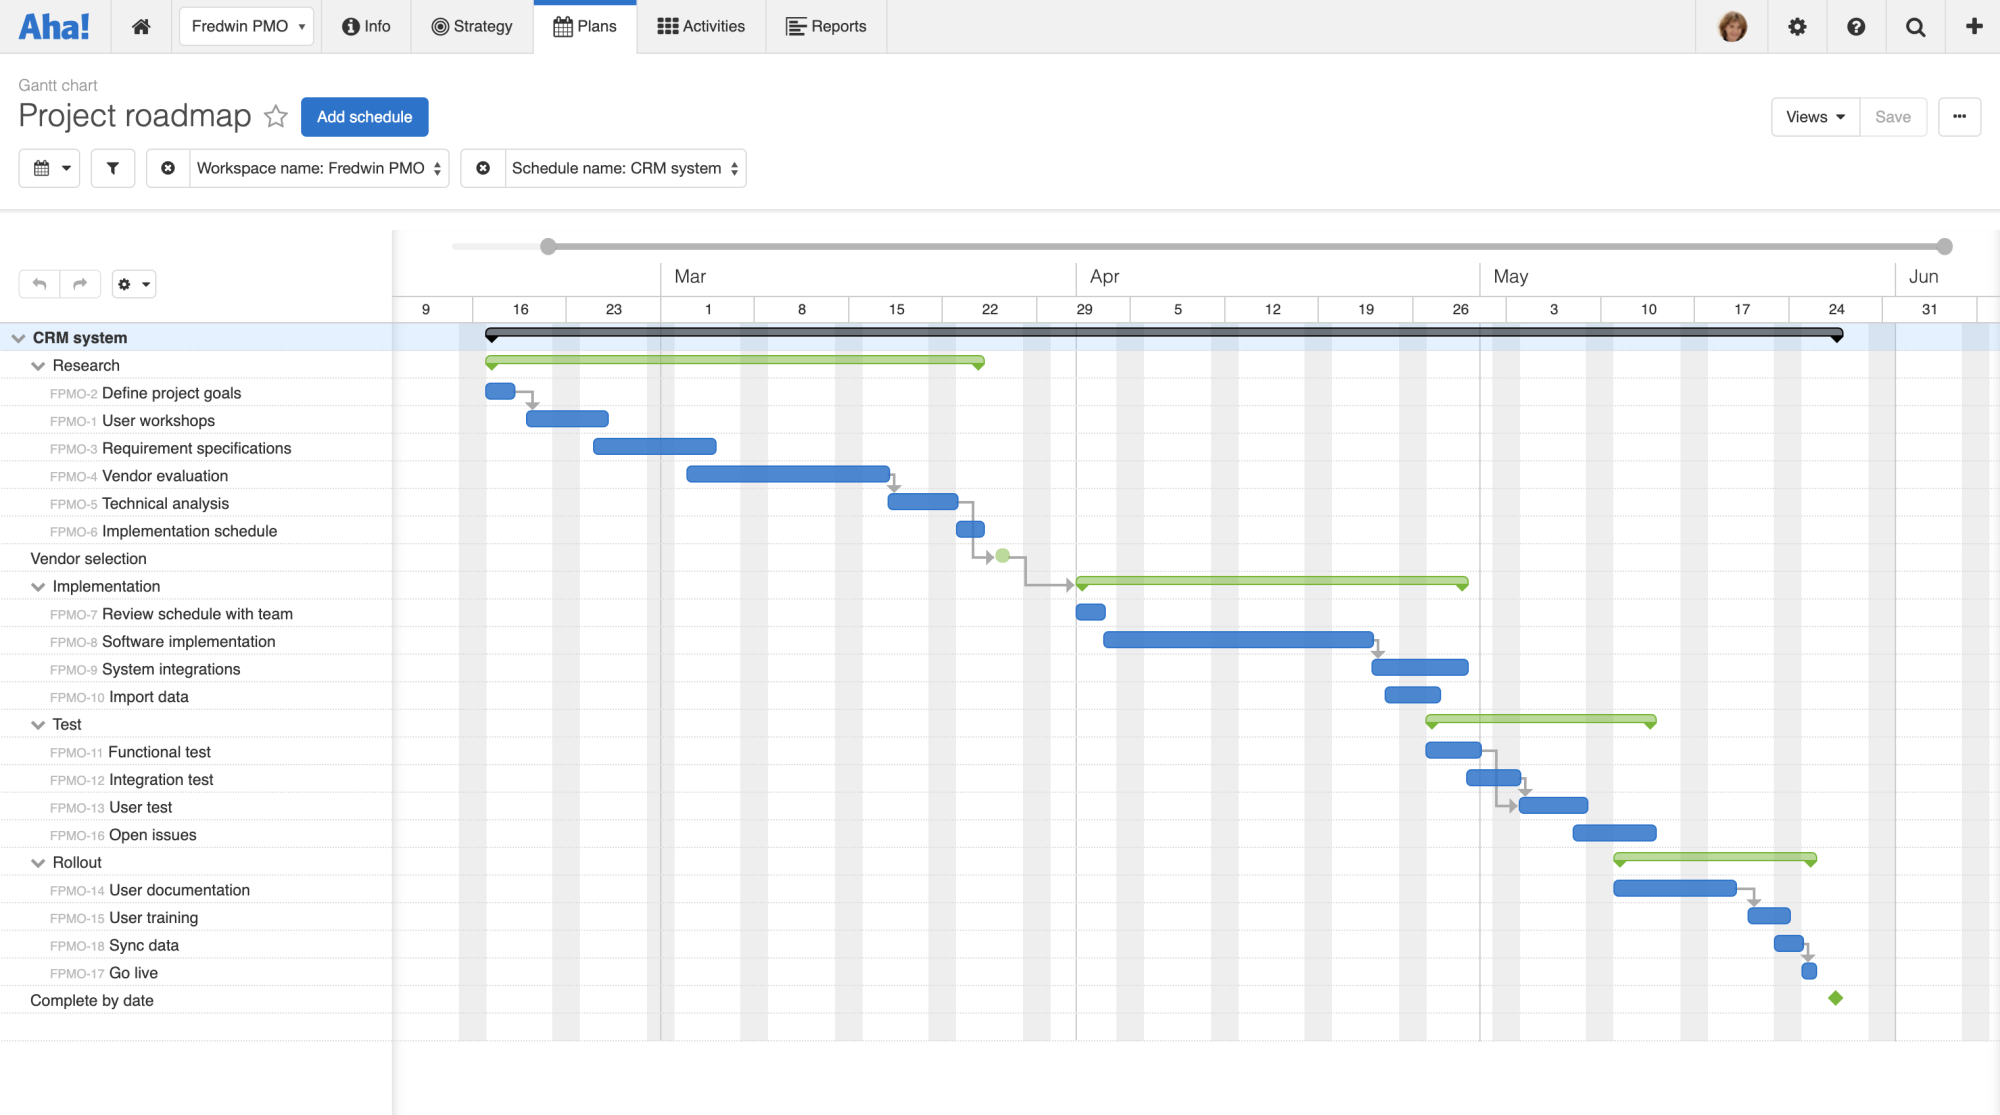 The Gantt chart provides visibility into planned, current, and completed activities. 